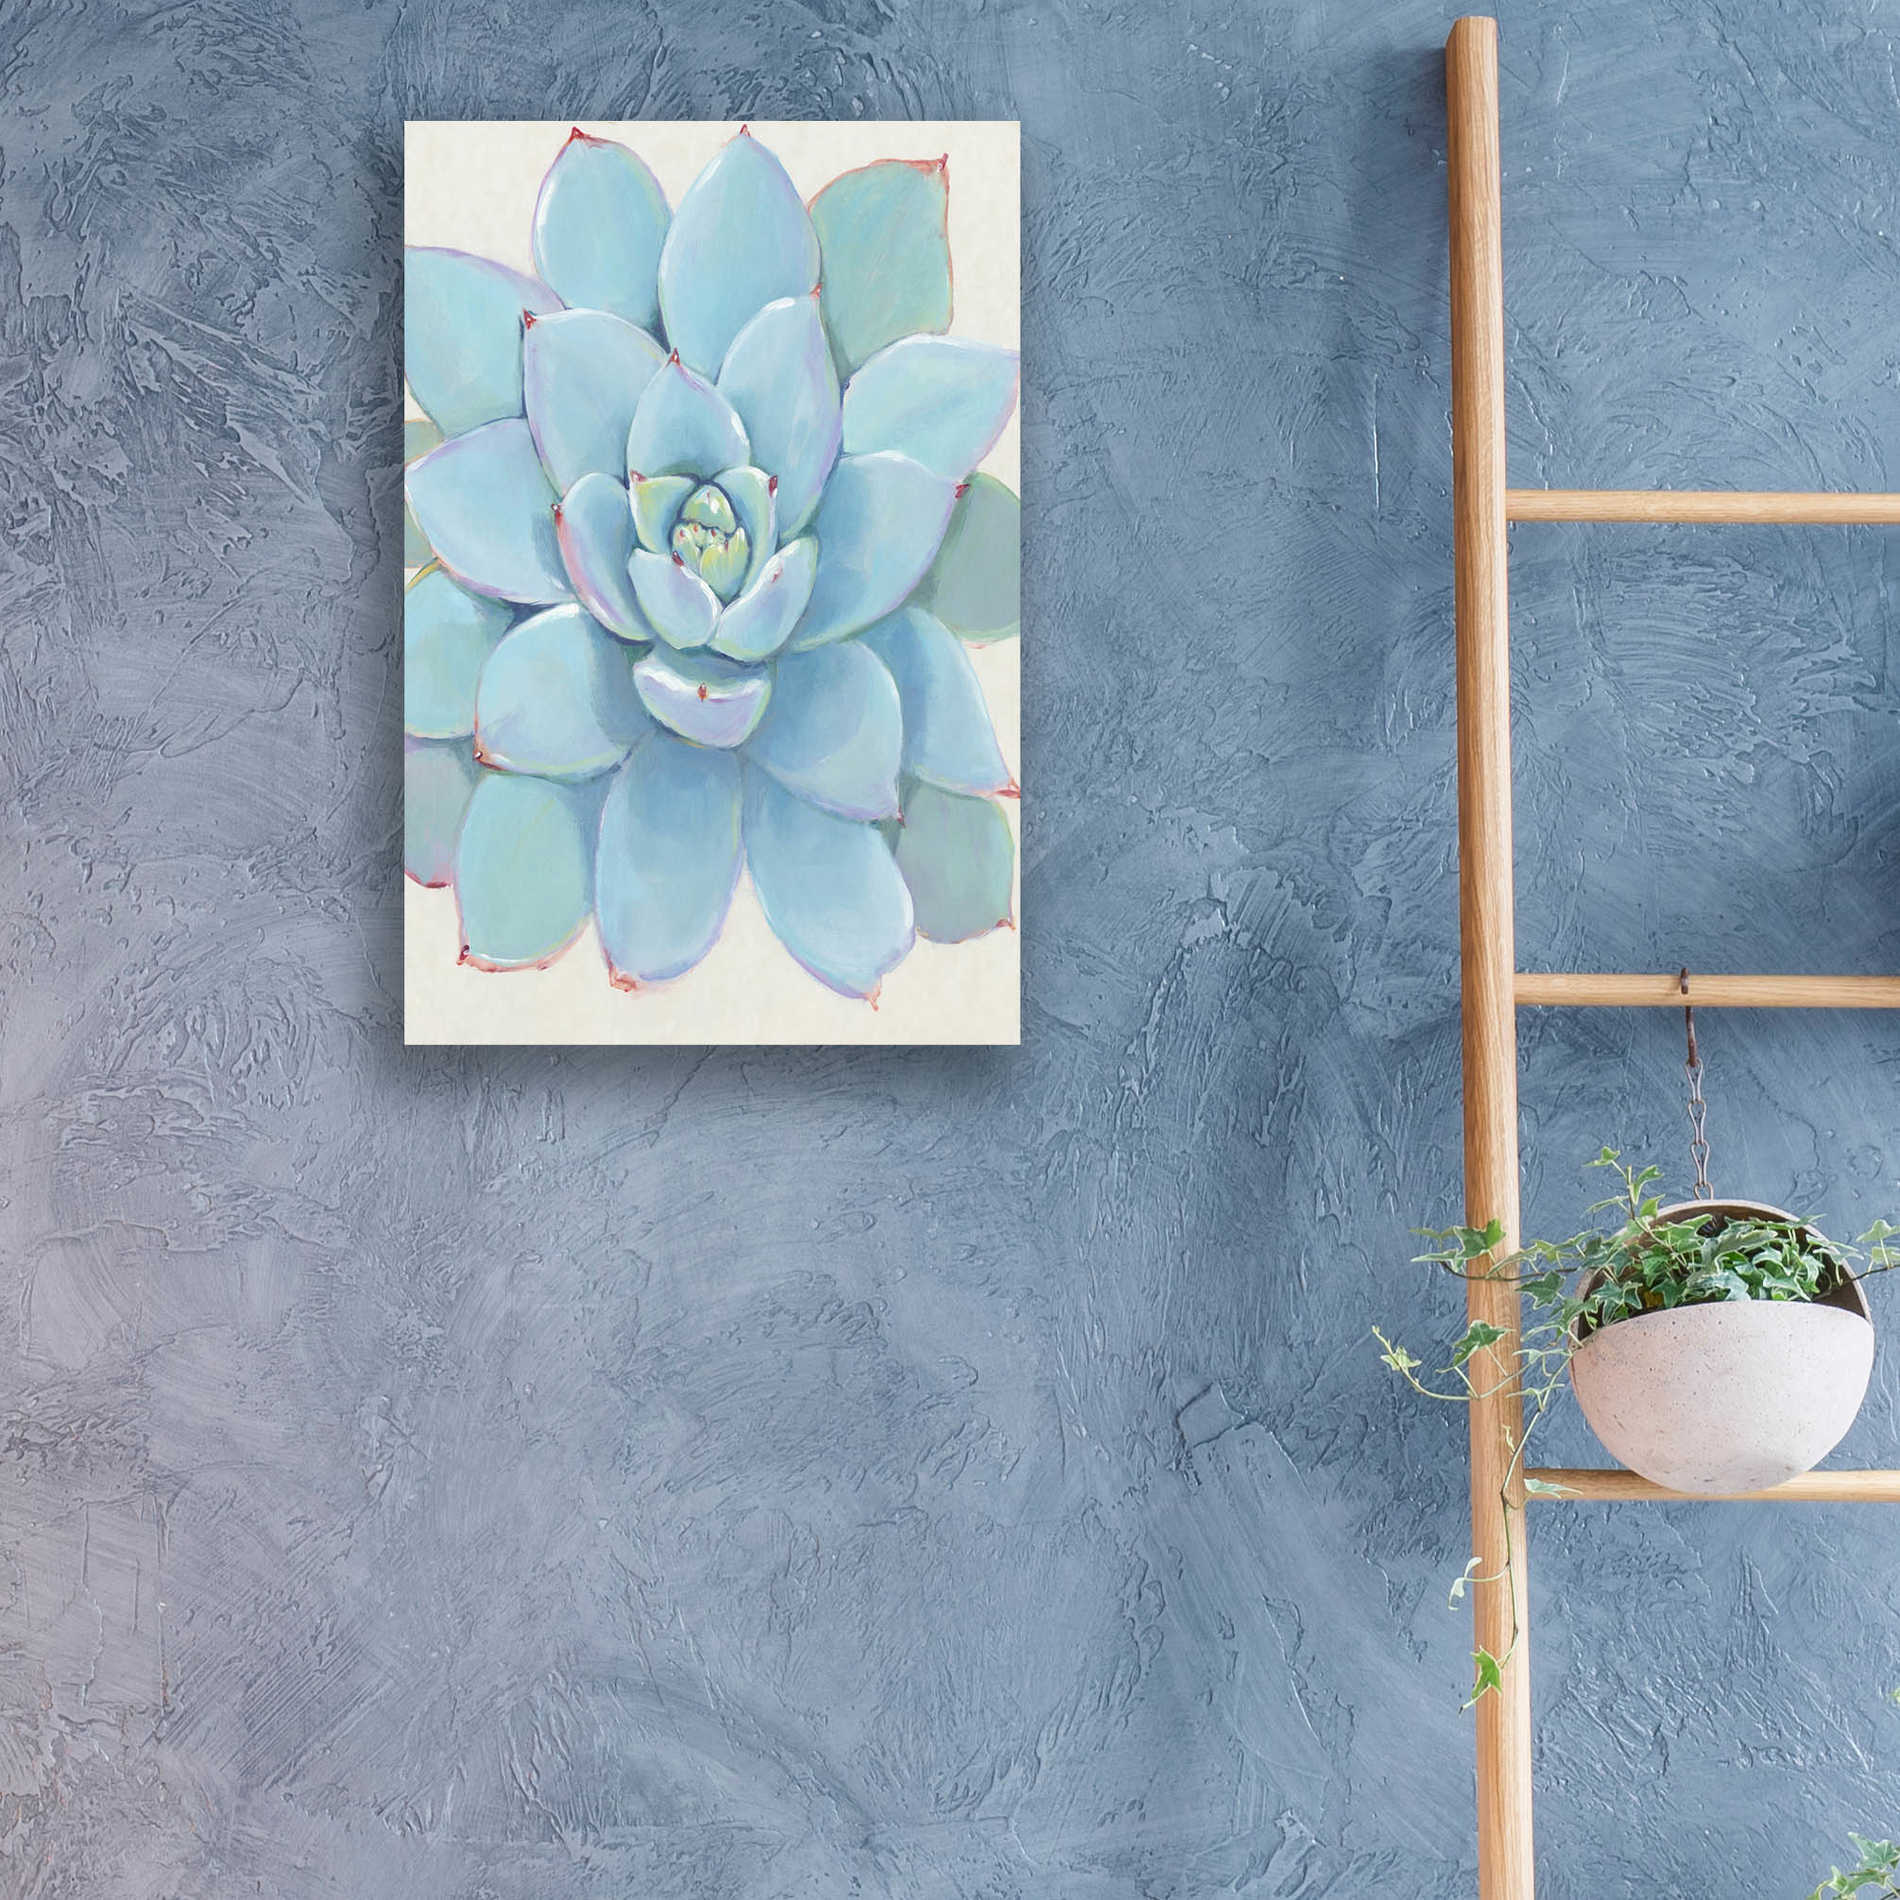 Epic Art 'Pastel Succulent I' by Tim O'Toole, Acrylic Glass Wall Art,16x24